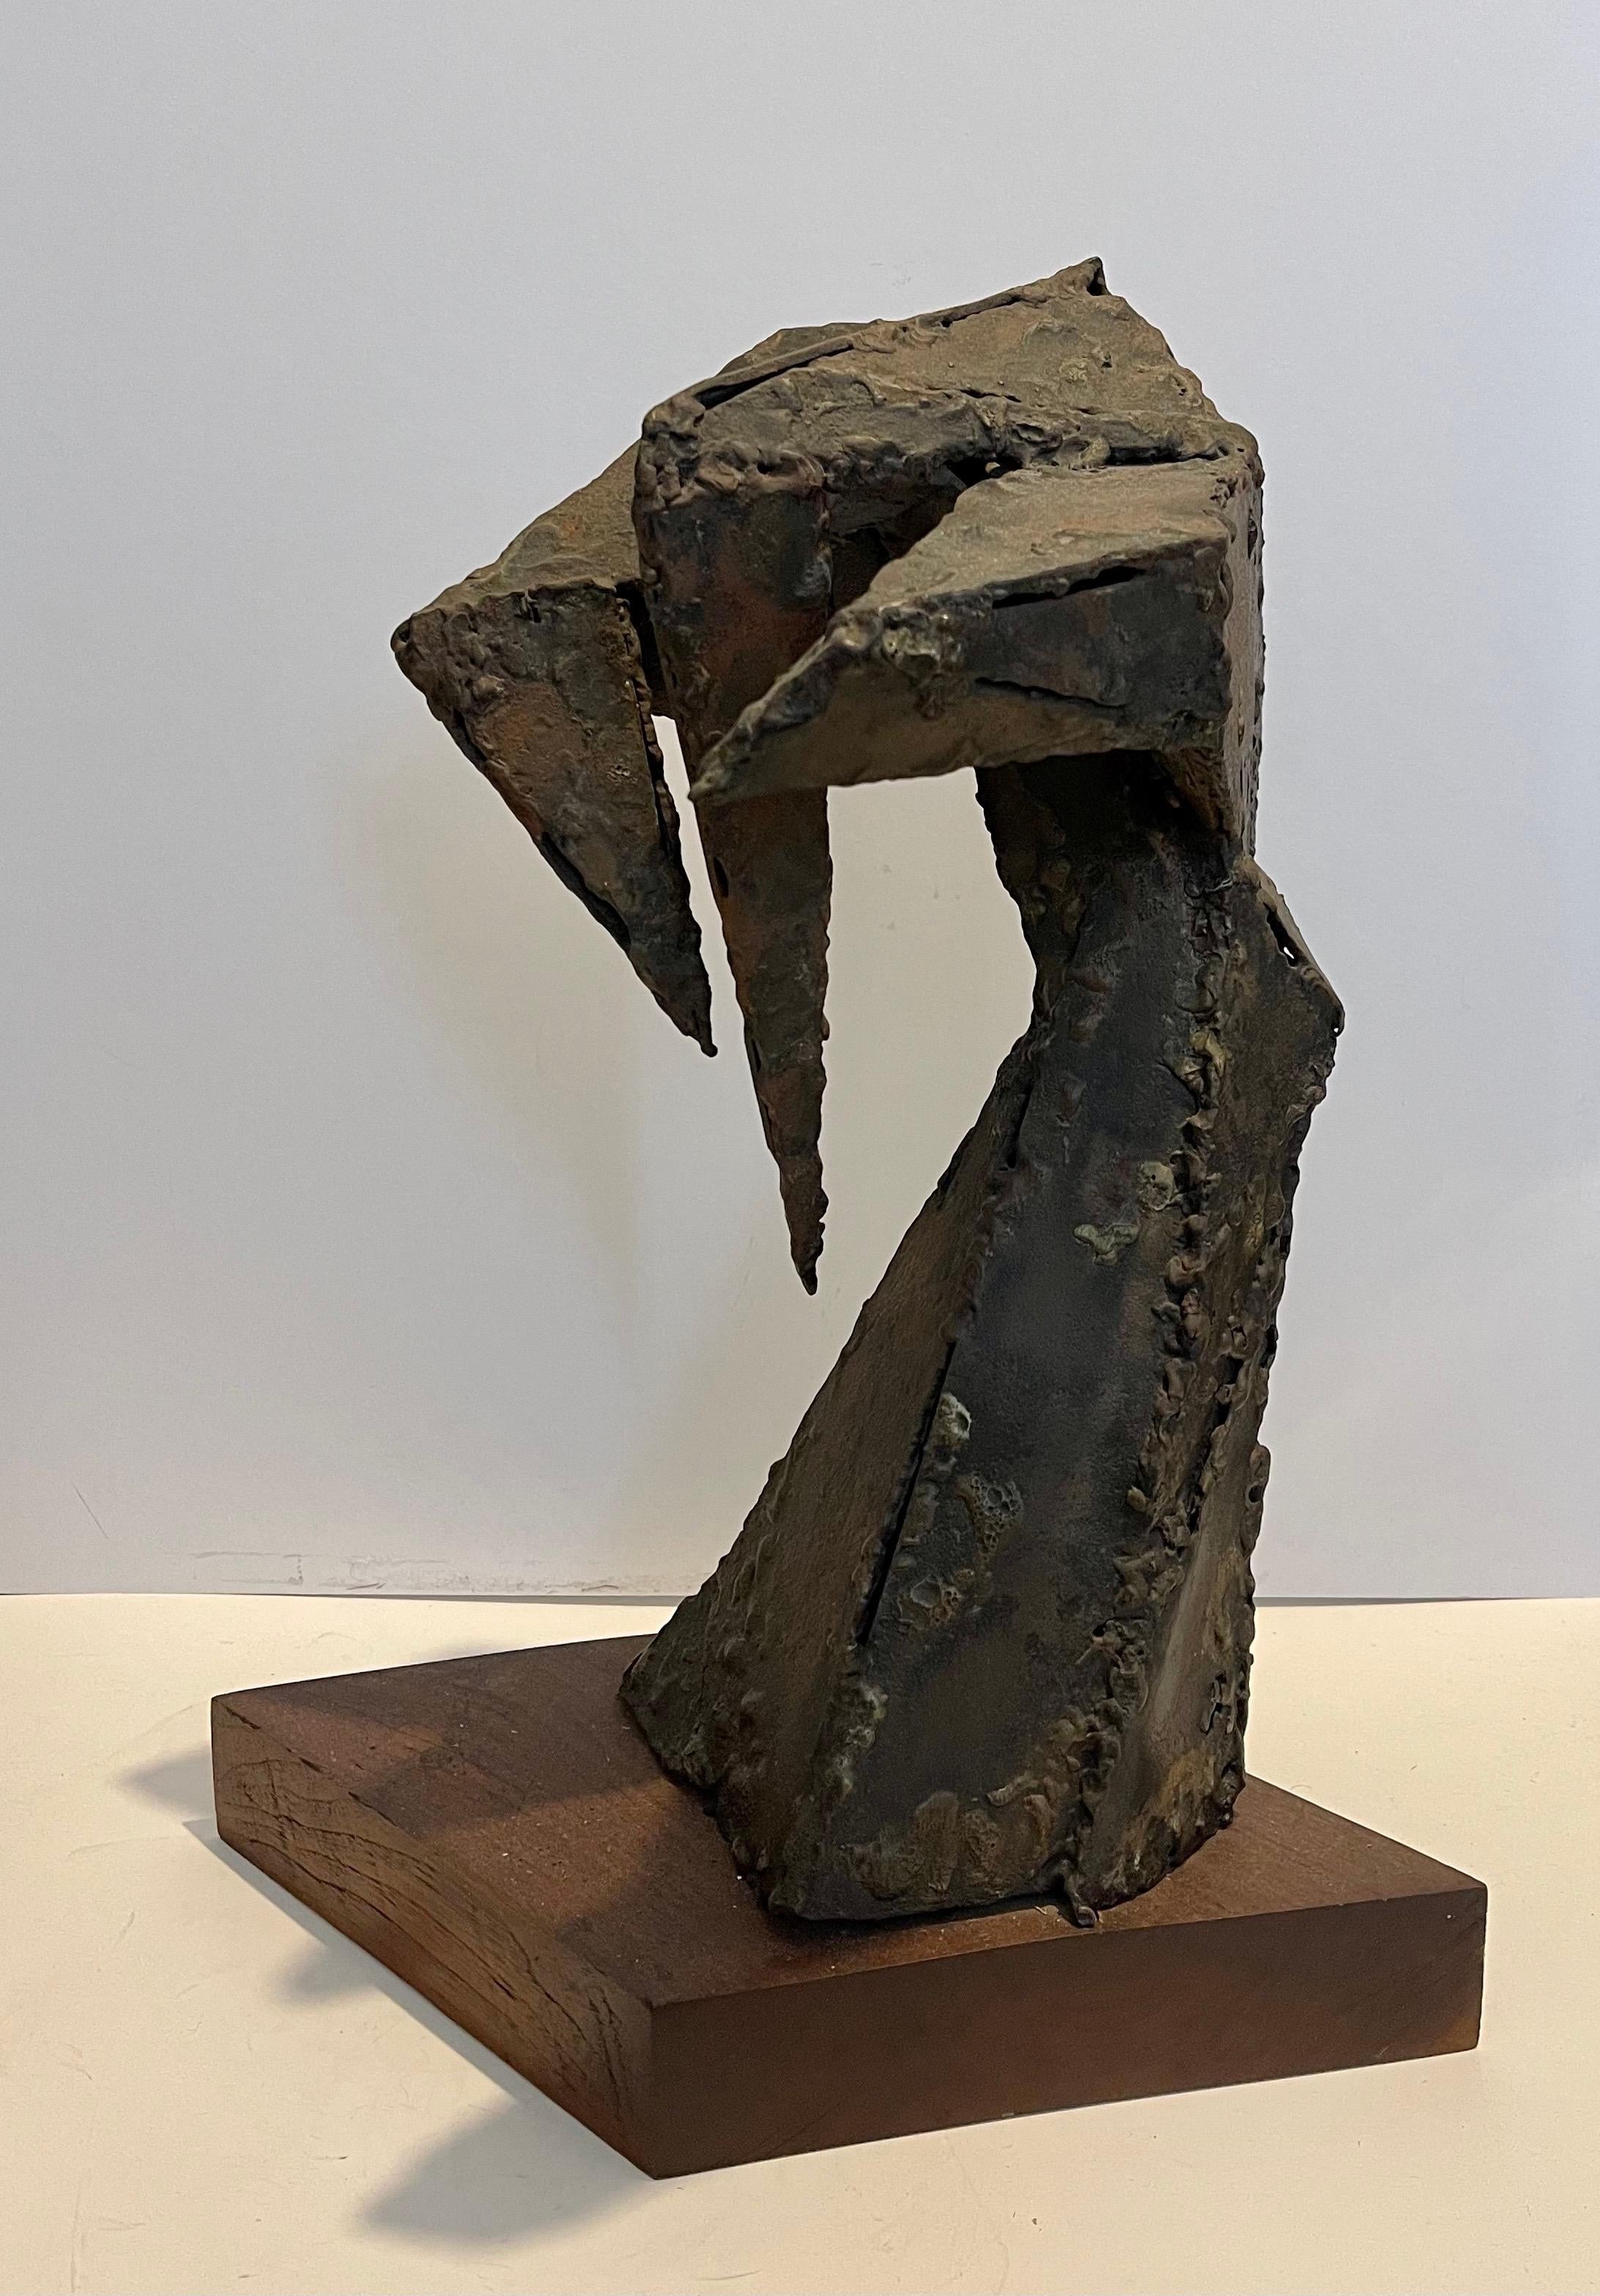 Seymour Lipton Abstract Sculpture - Abstract Expressionist Biomorphic Welded Metal Sculpture 